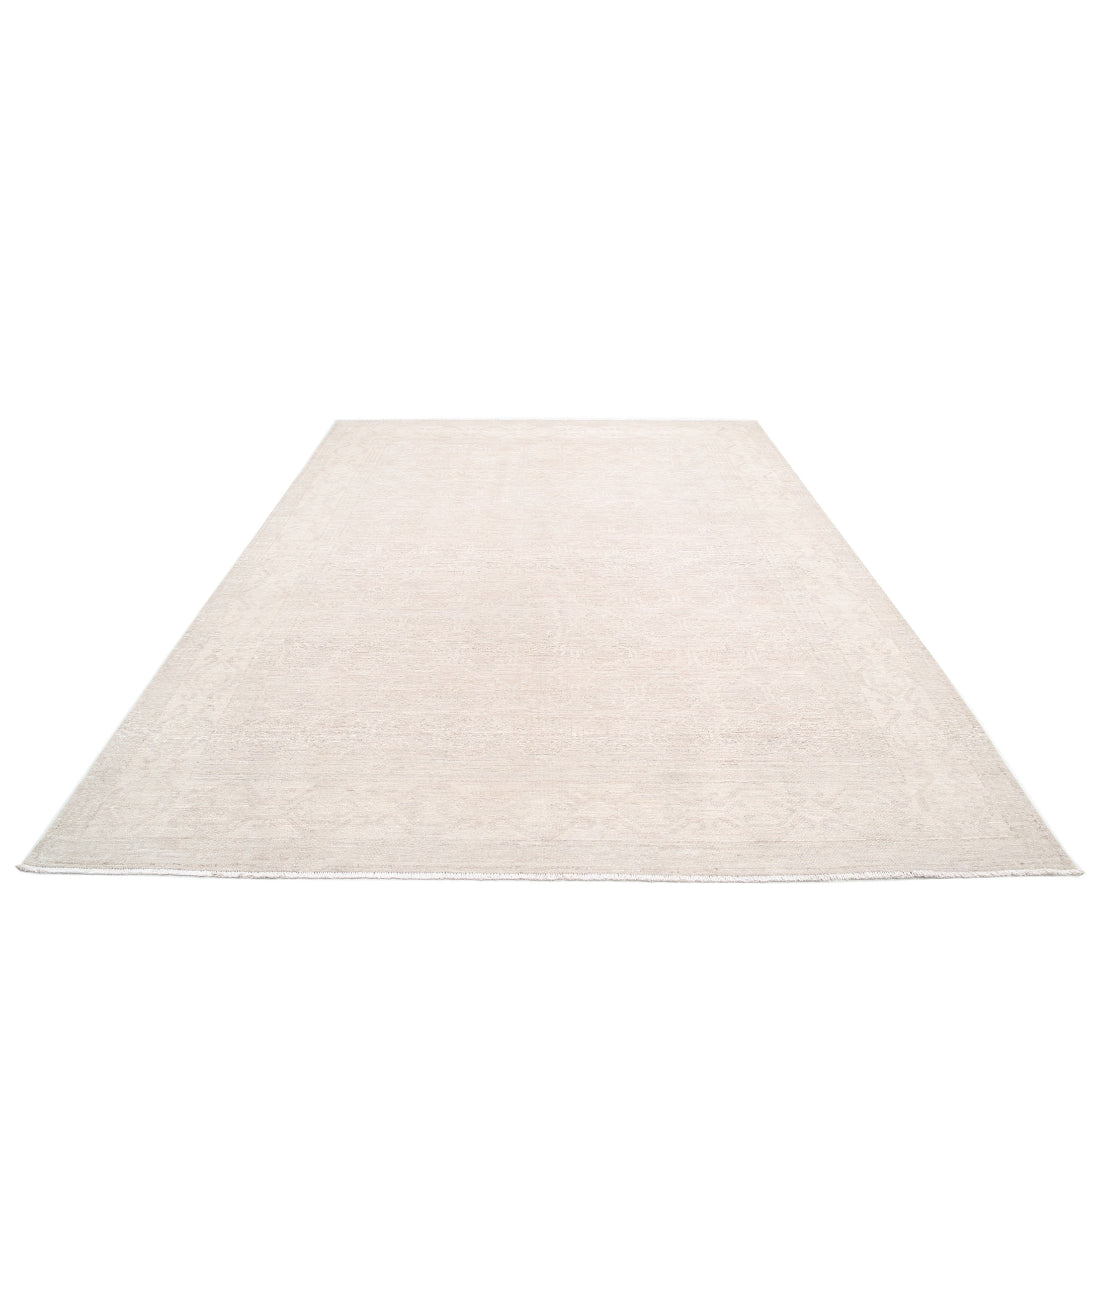 Hand Knotted Khotan Wool Rug - 8'4'' x 11'4'' 8'4'' x 11'4'' (250 X 340) / Taupe / Ivory